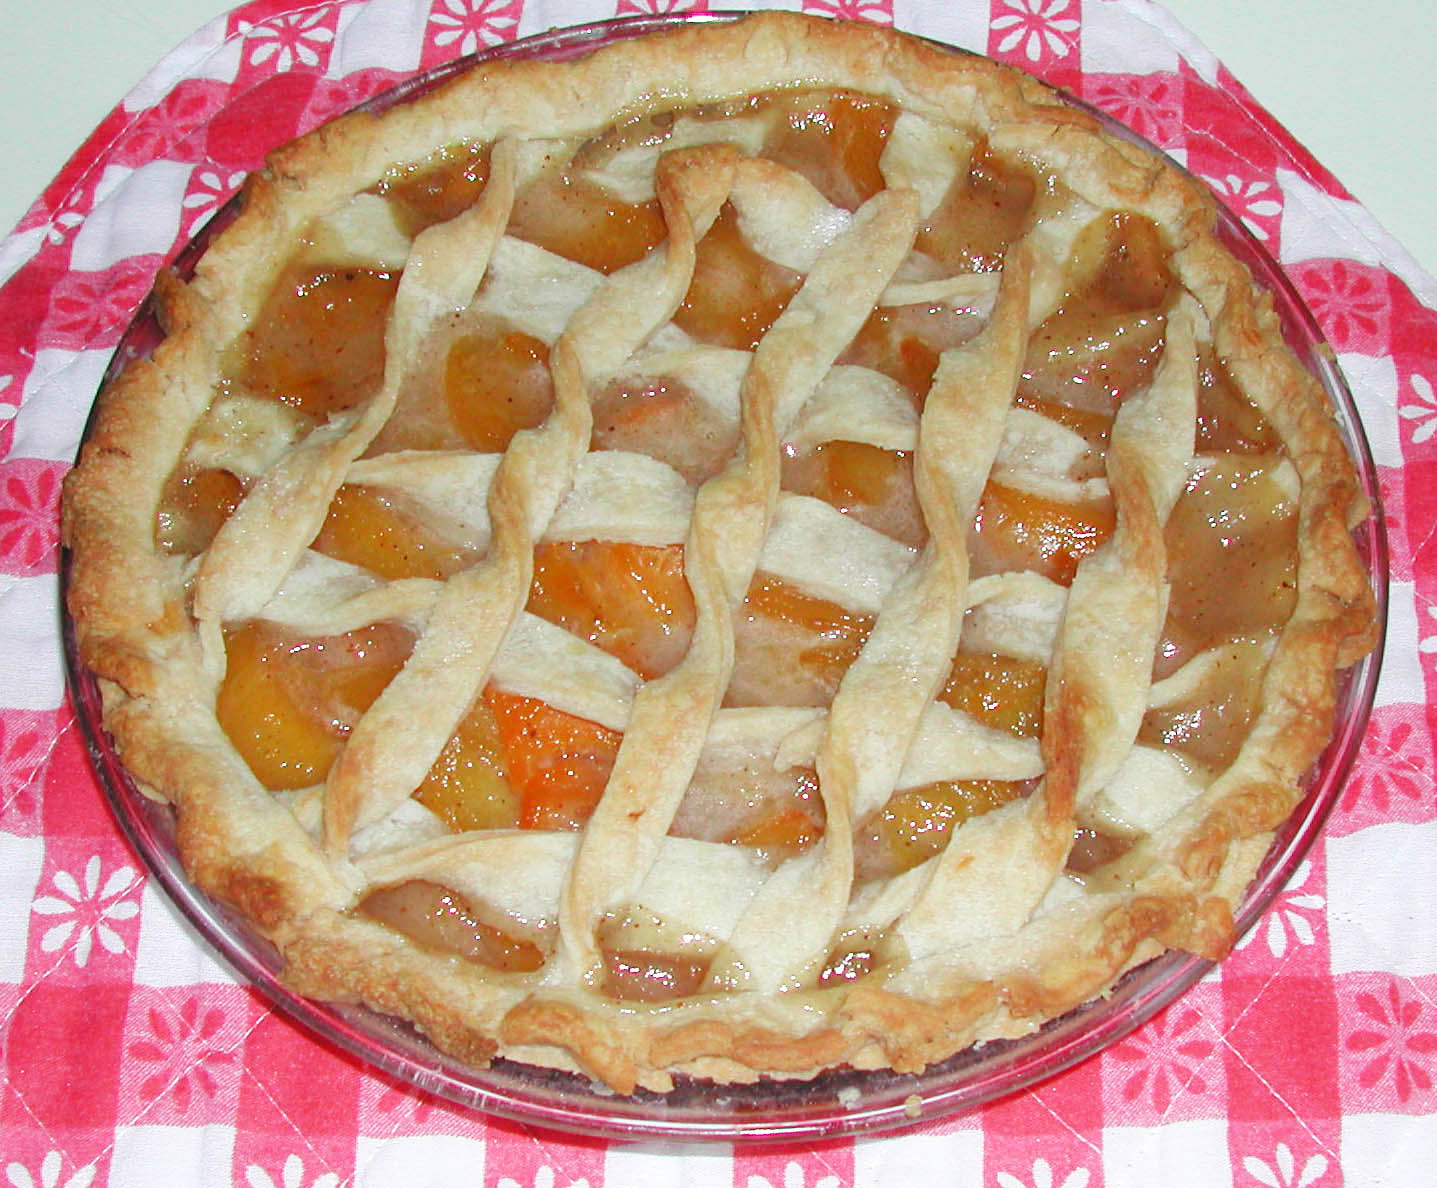 The Iowa Housewife: Golden Peach Pie with Canned Peaches